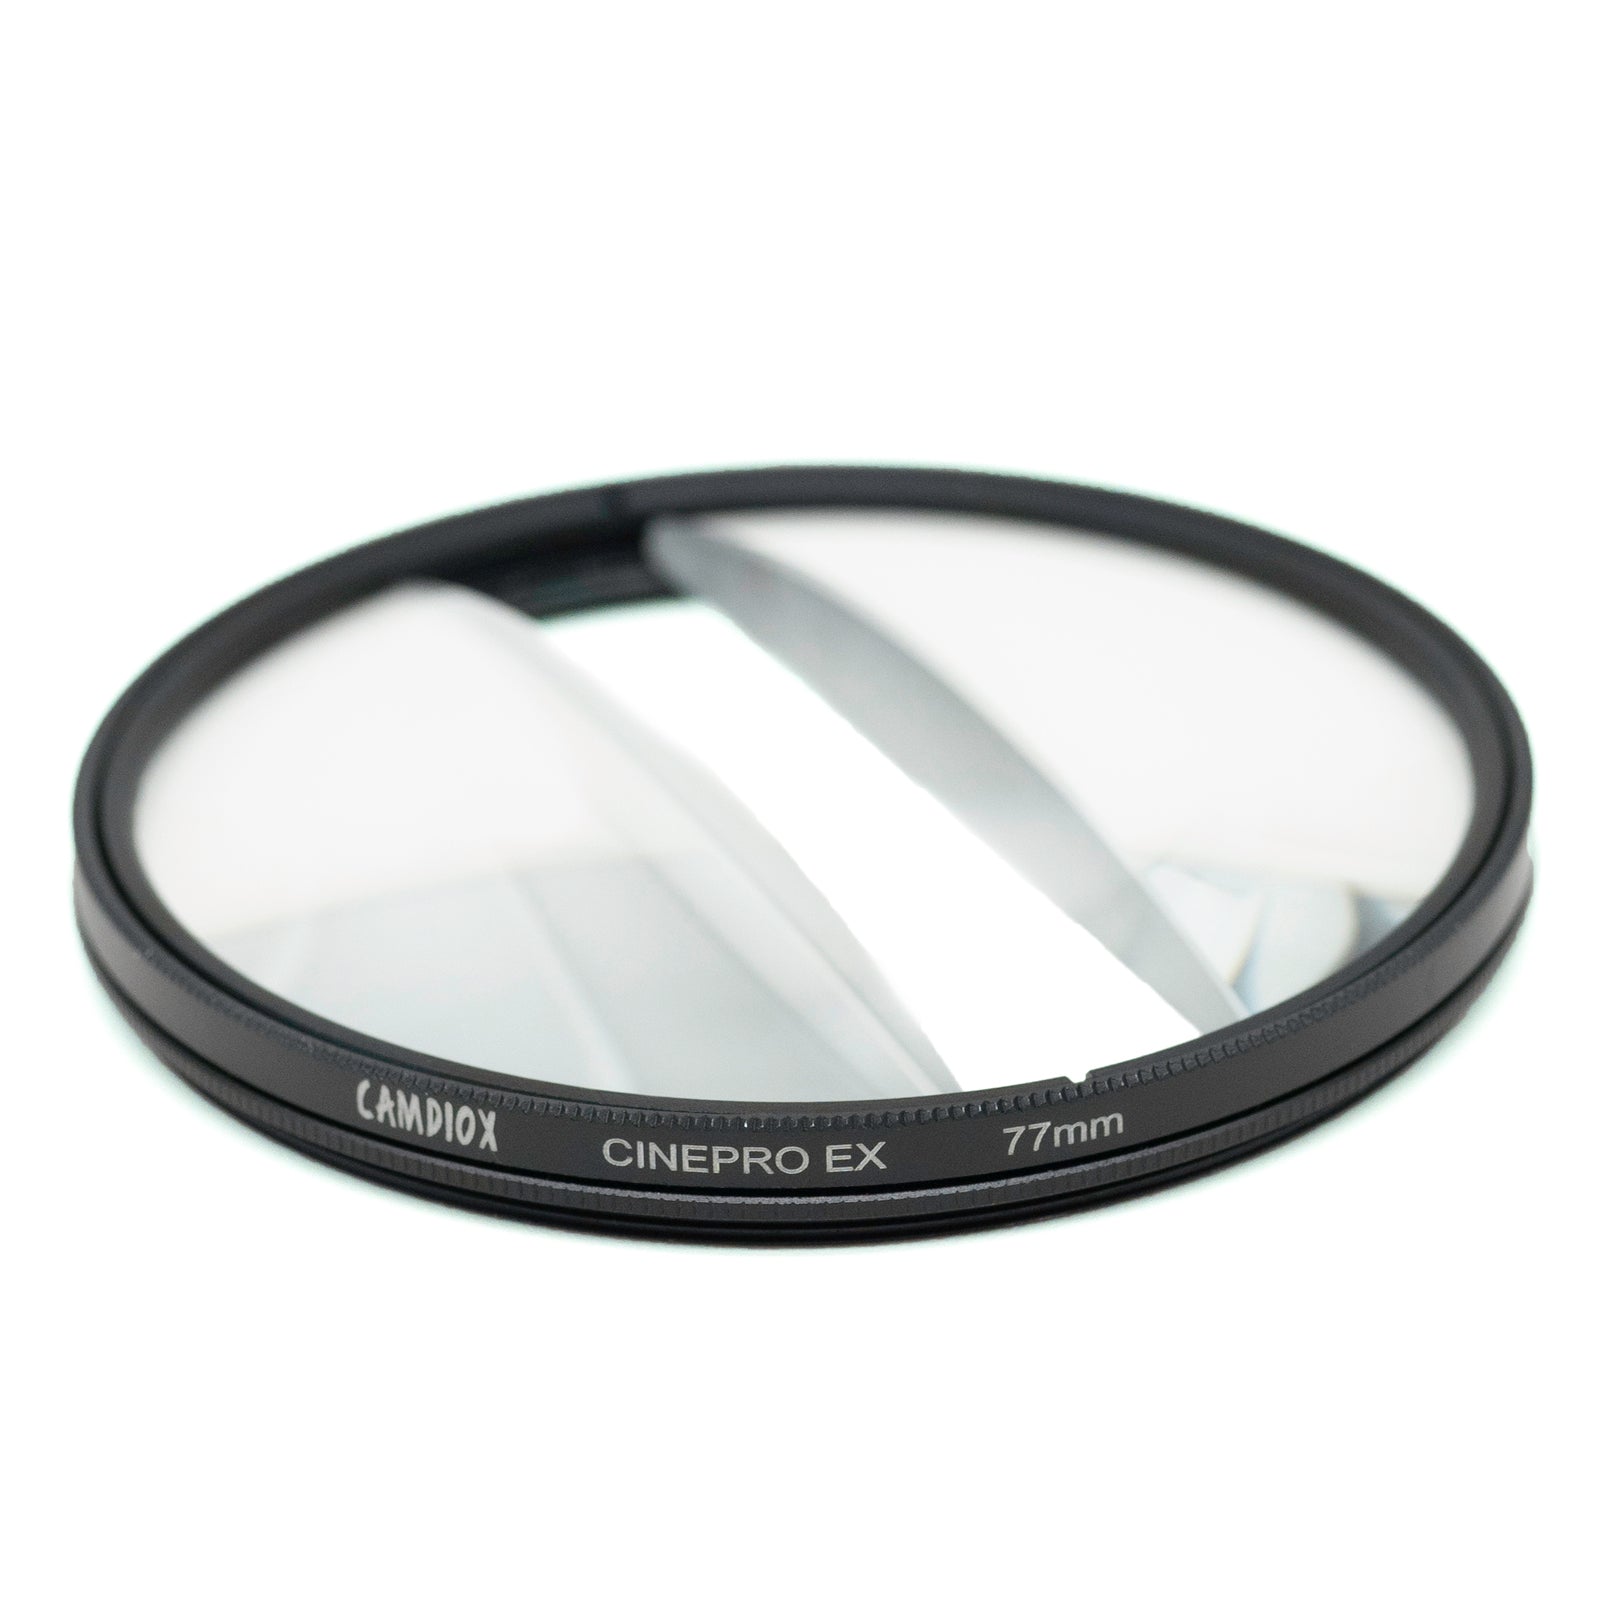 Camdiox Cinepro Pro Filter - Middle Split - effect filter for Canon Nikon Sony Olympus Leica DSLR mirrorless camera lenses